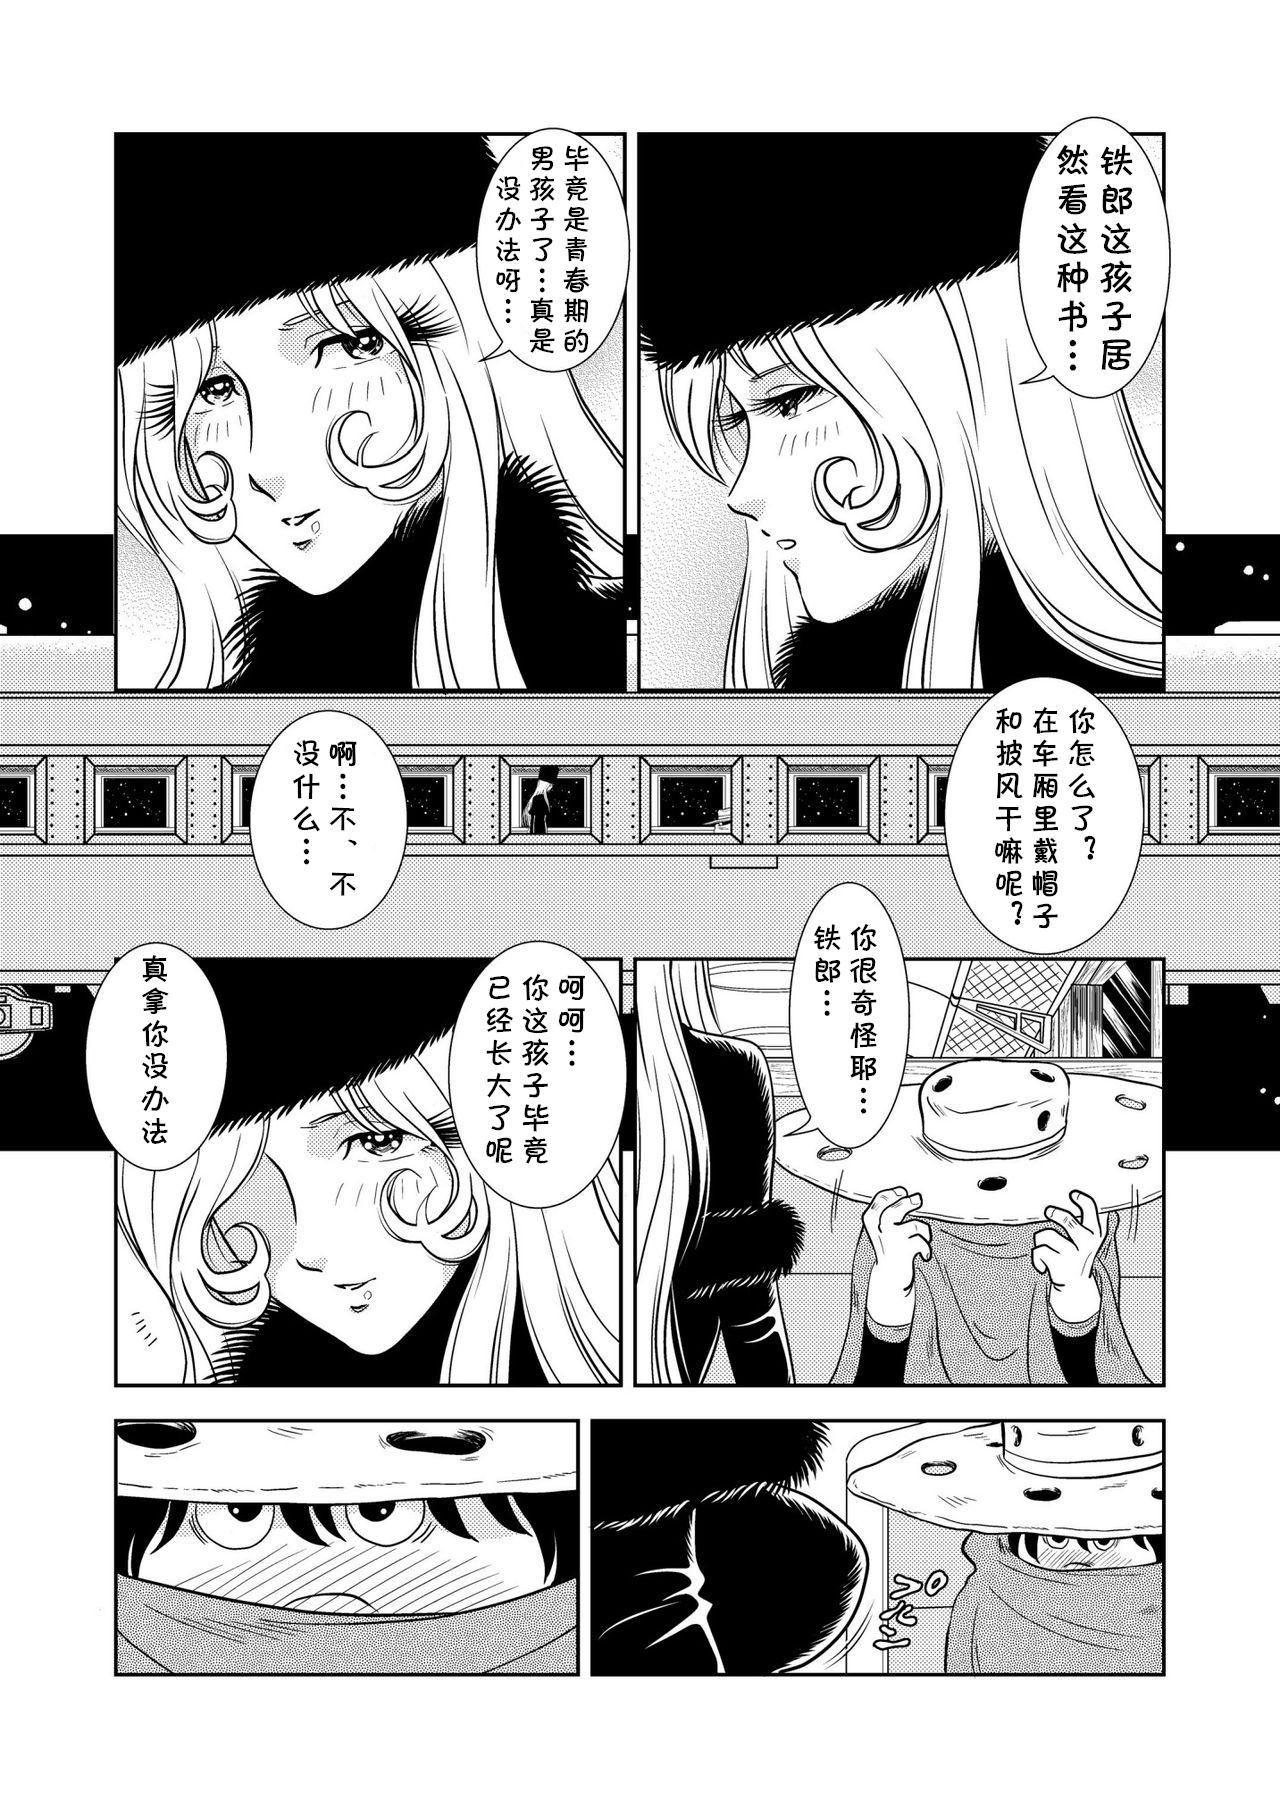 Amateur Porn Free Maetel Story 2 - Galaxy express 999 | ginga tetsudou 999 Onlyfans - Page 4